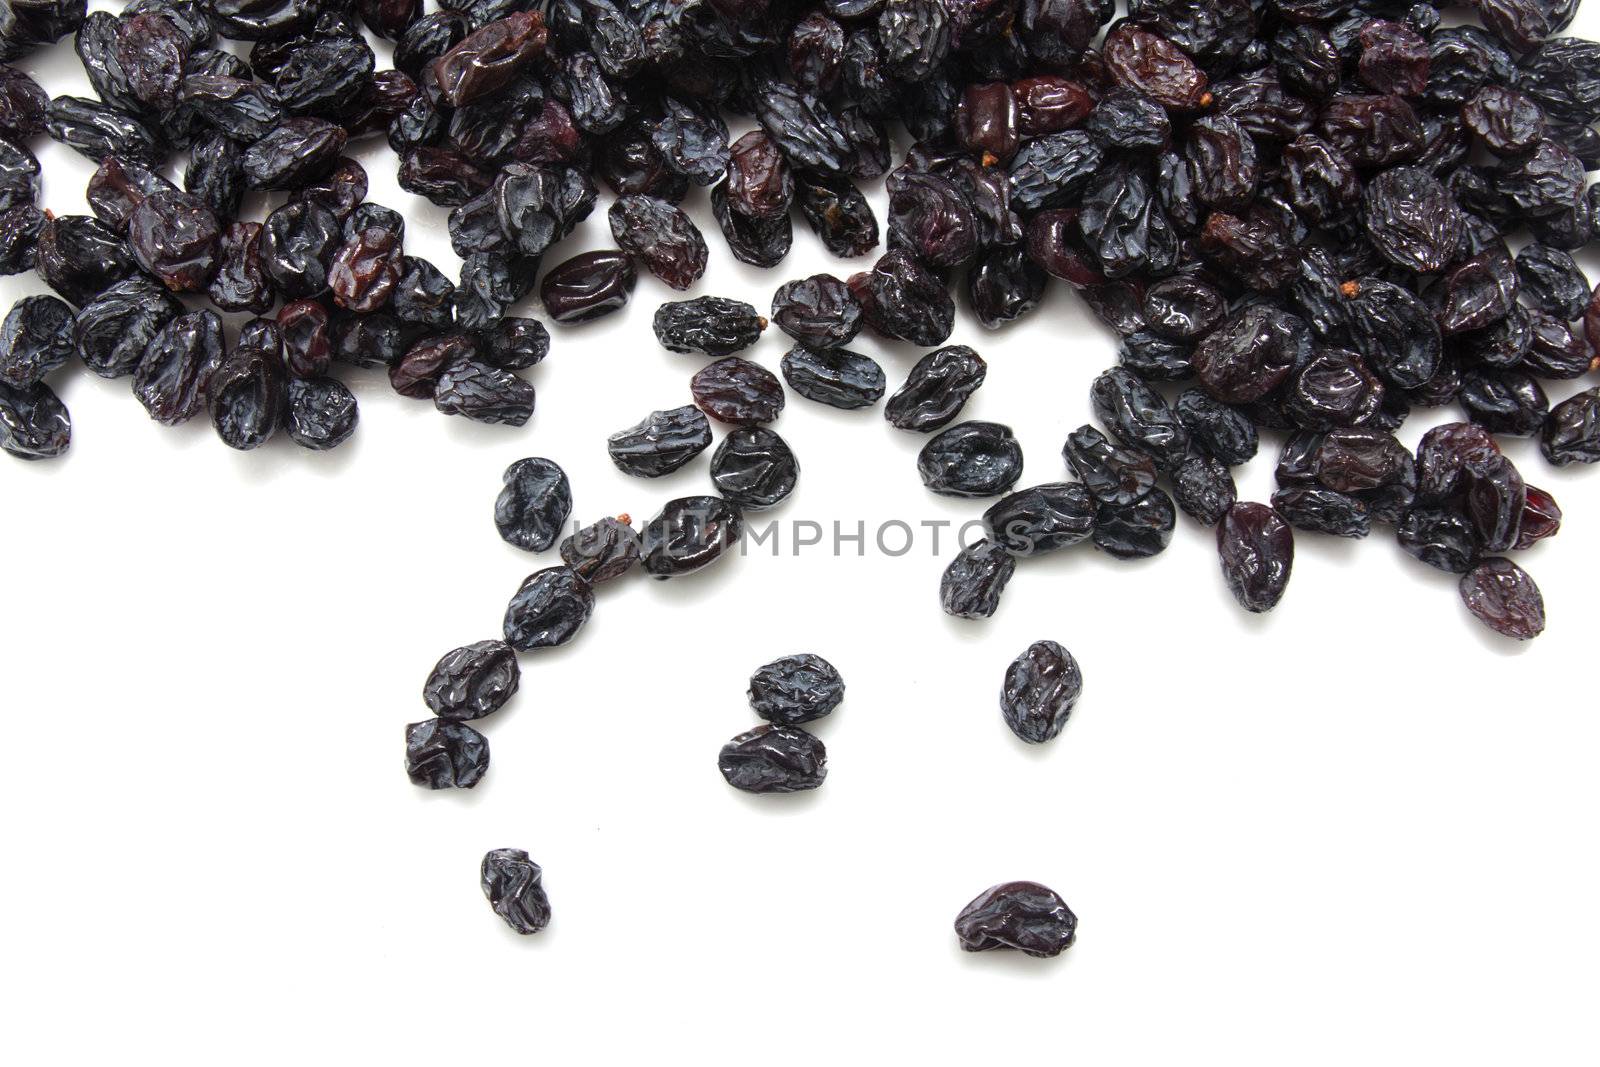 Composition from dried fruits on a light background  by schankz